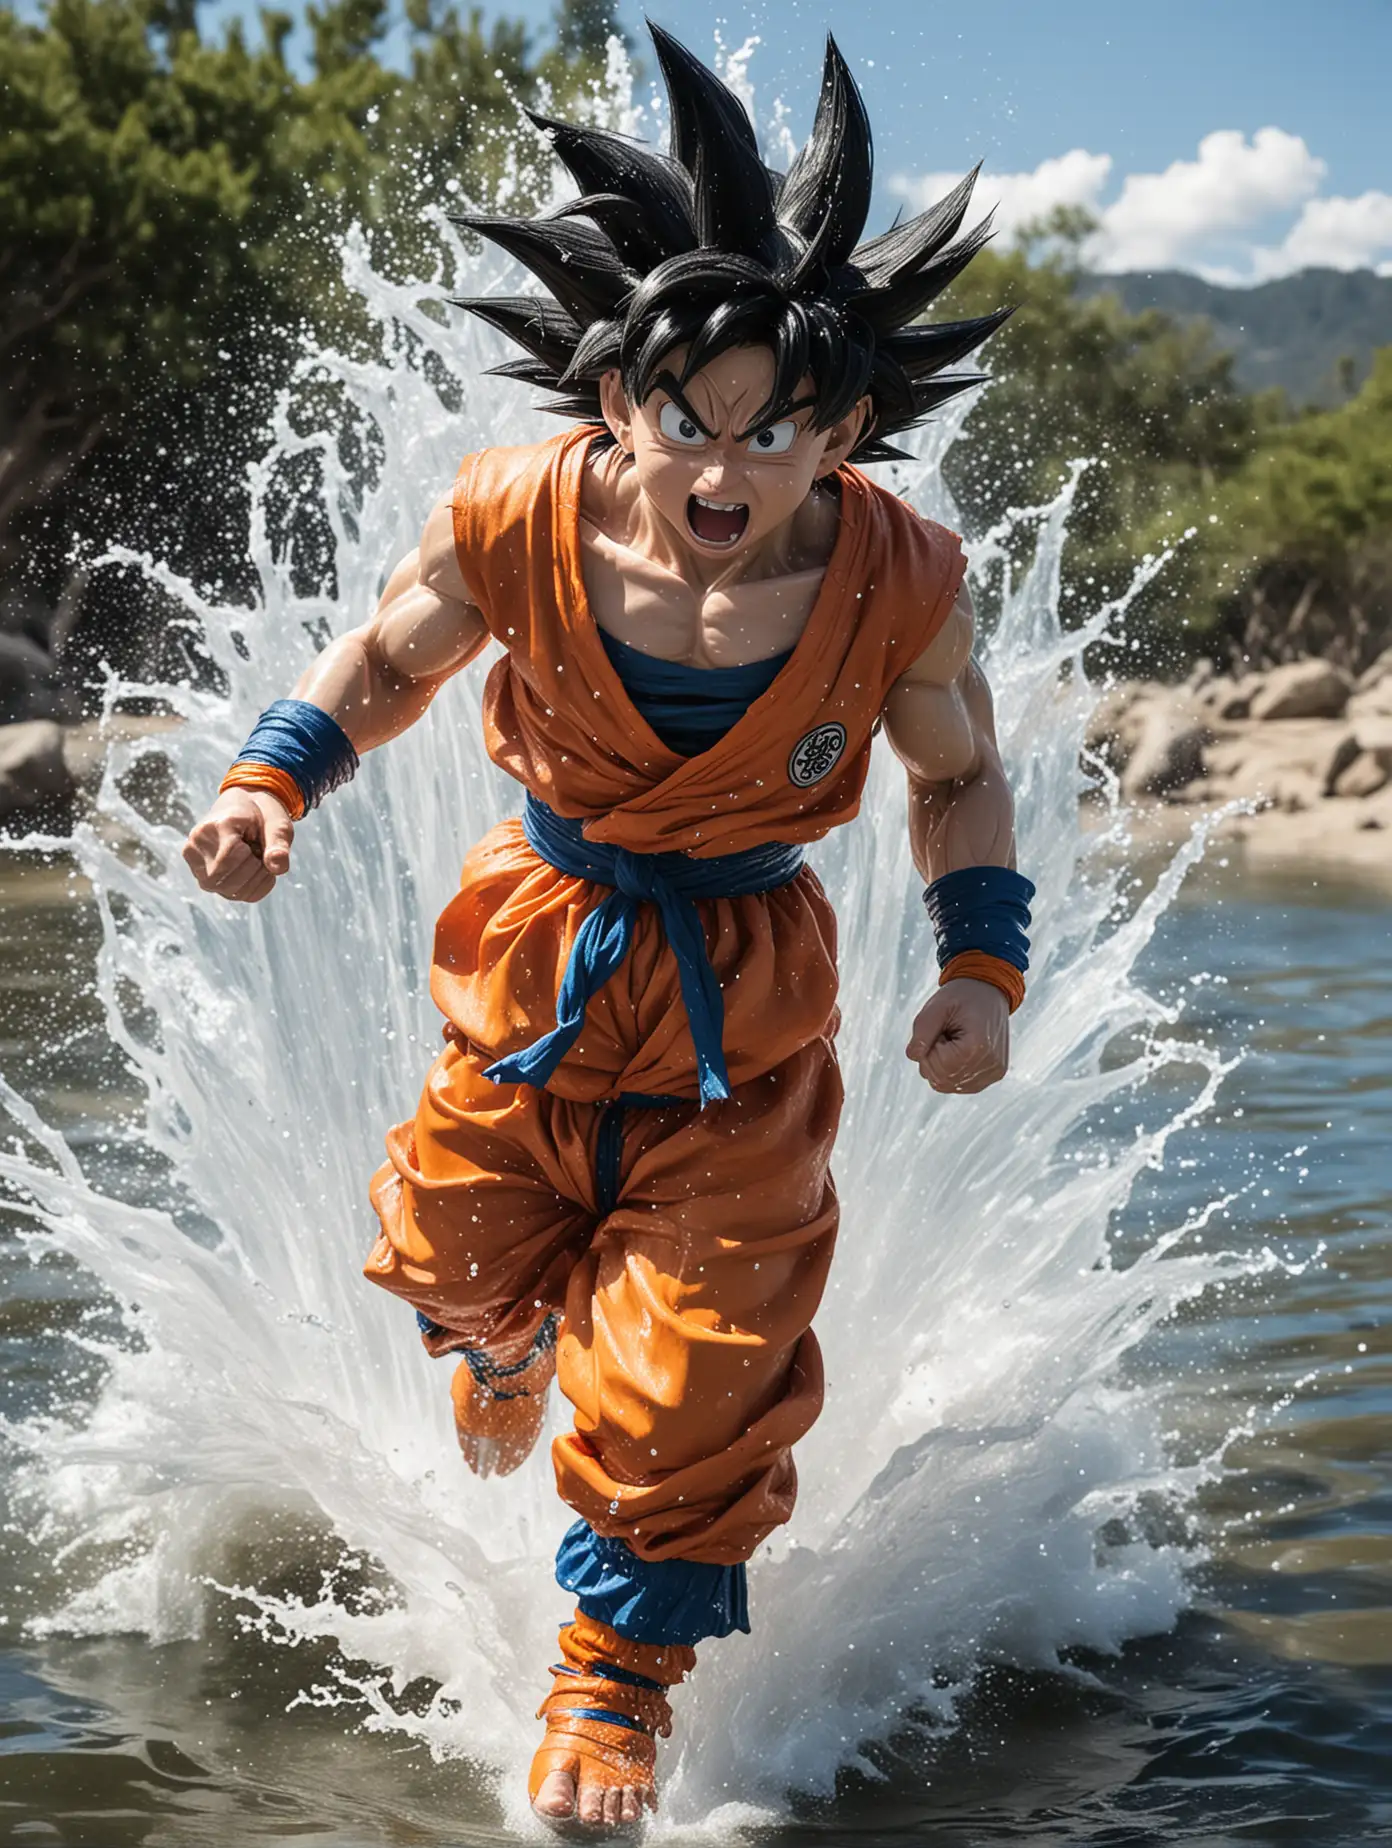 Goku is Running on water. realistic, film stock, bright colors"